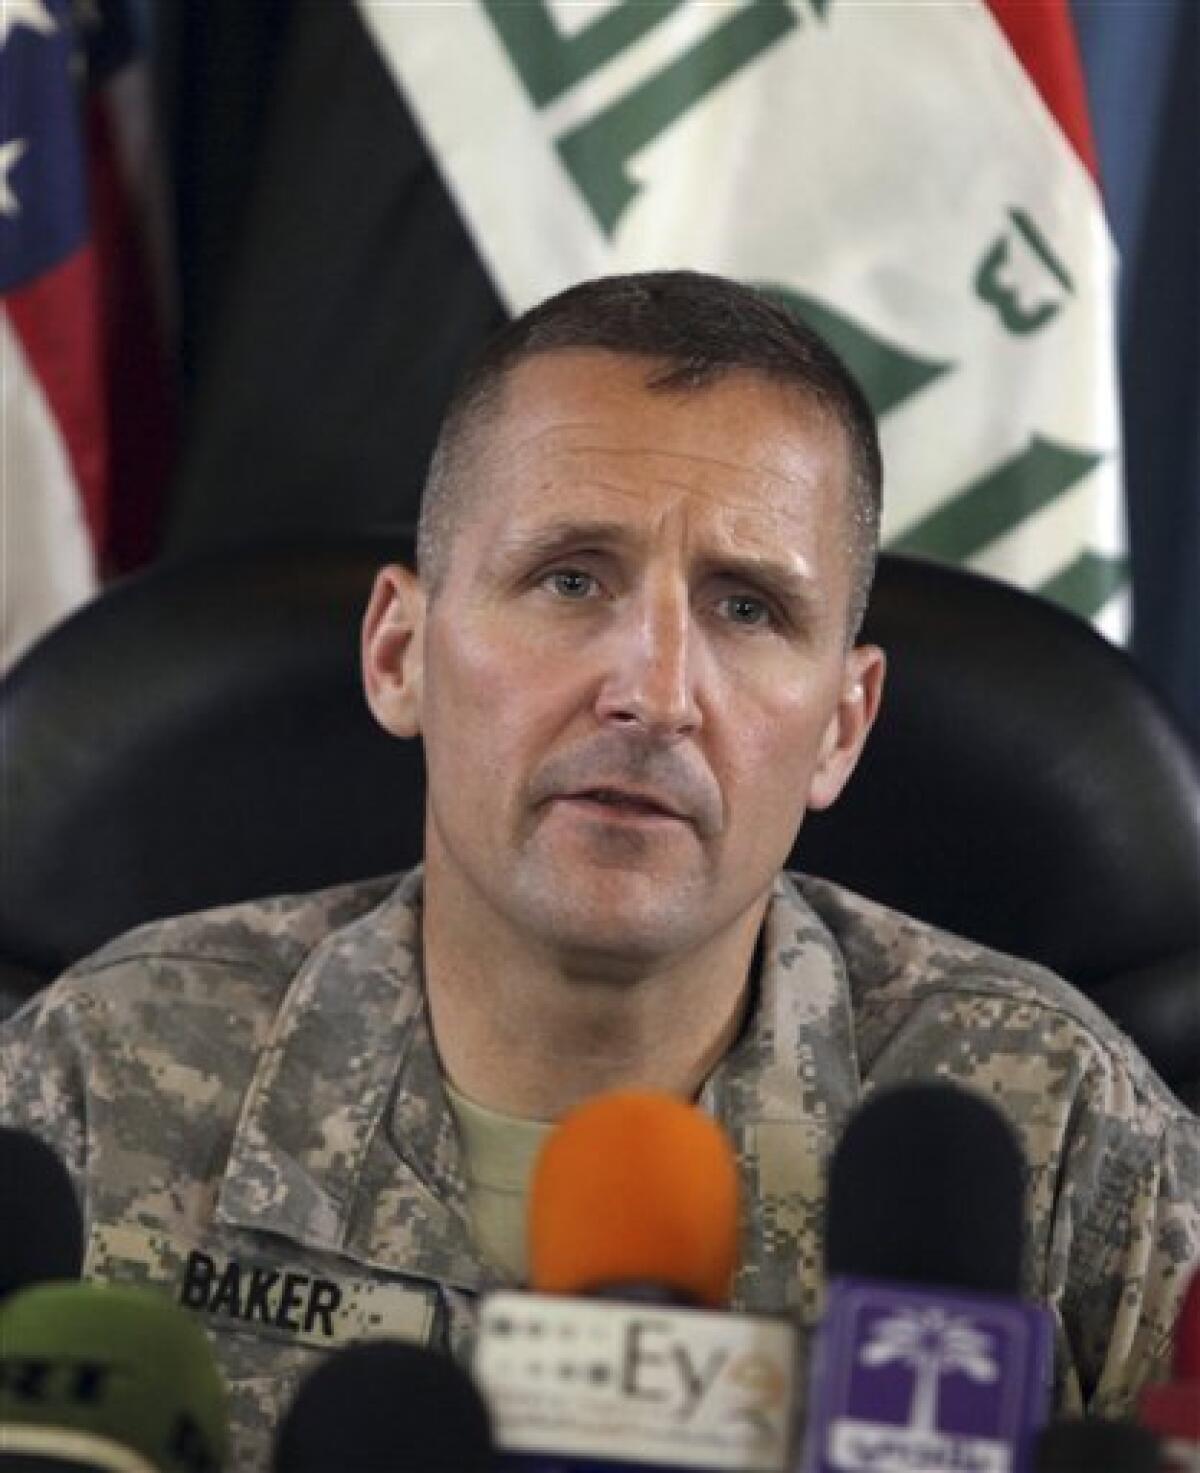 U.S. Army Brig.Gen. Ralph Baker speaks at a press conference in the Green Zone of Baghdad, Iraq, Wednesday, April 7, 2010. Gen. Baker told reporters that al-Qaida is responsible for the recent wave of violence. (AP Photo/Karim Kadim)